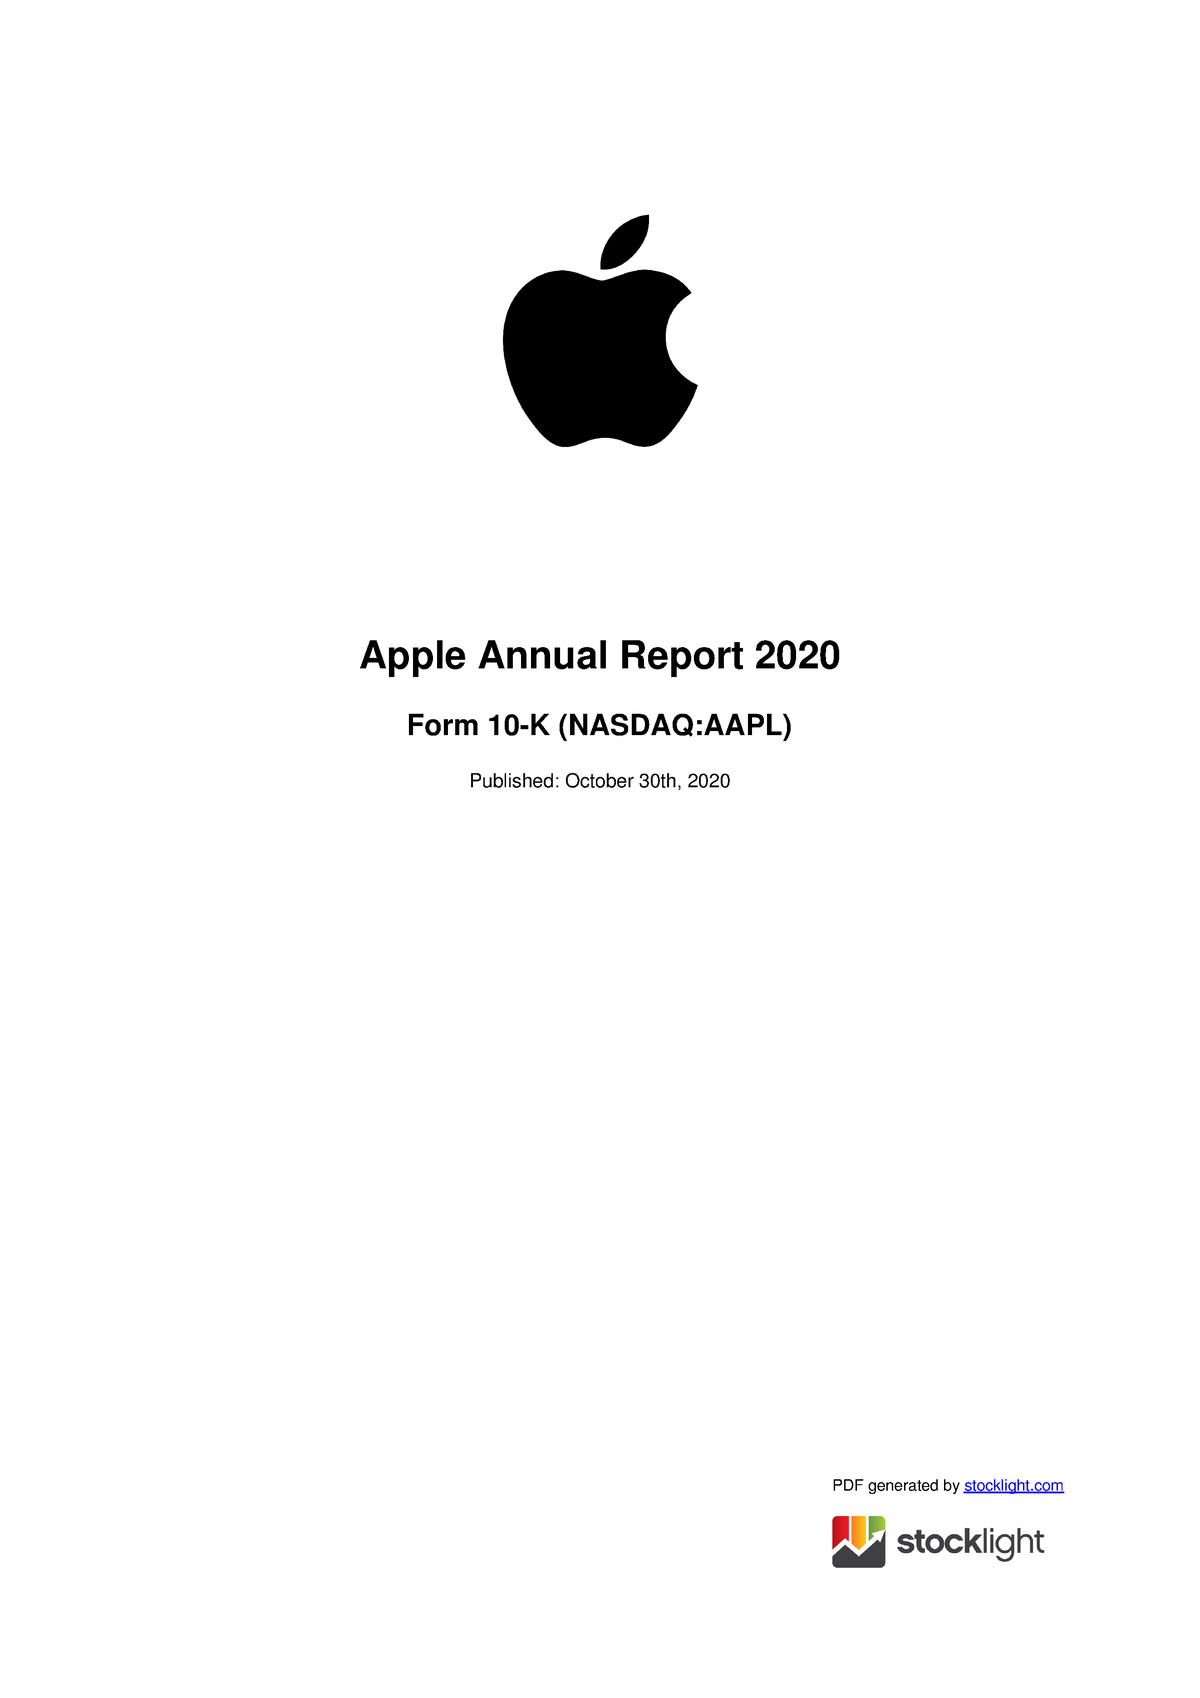 annual report on apple